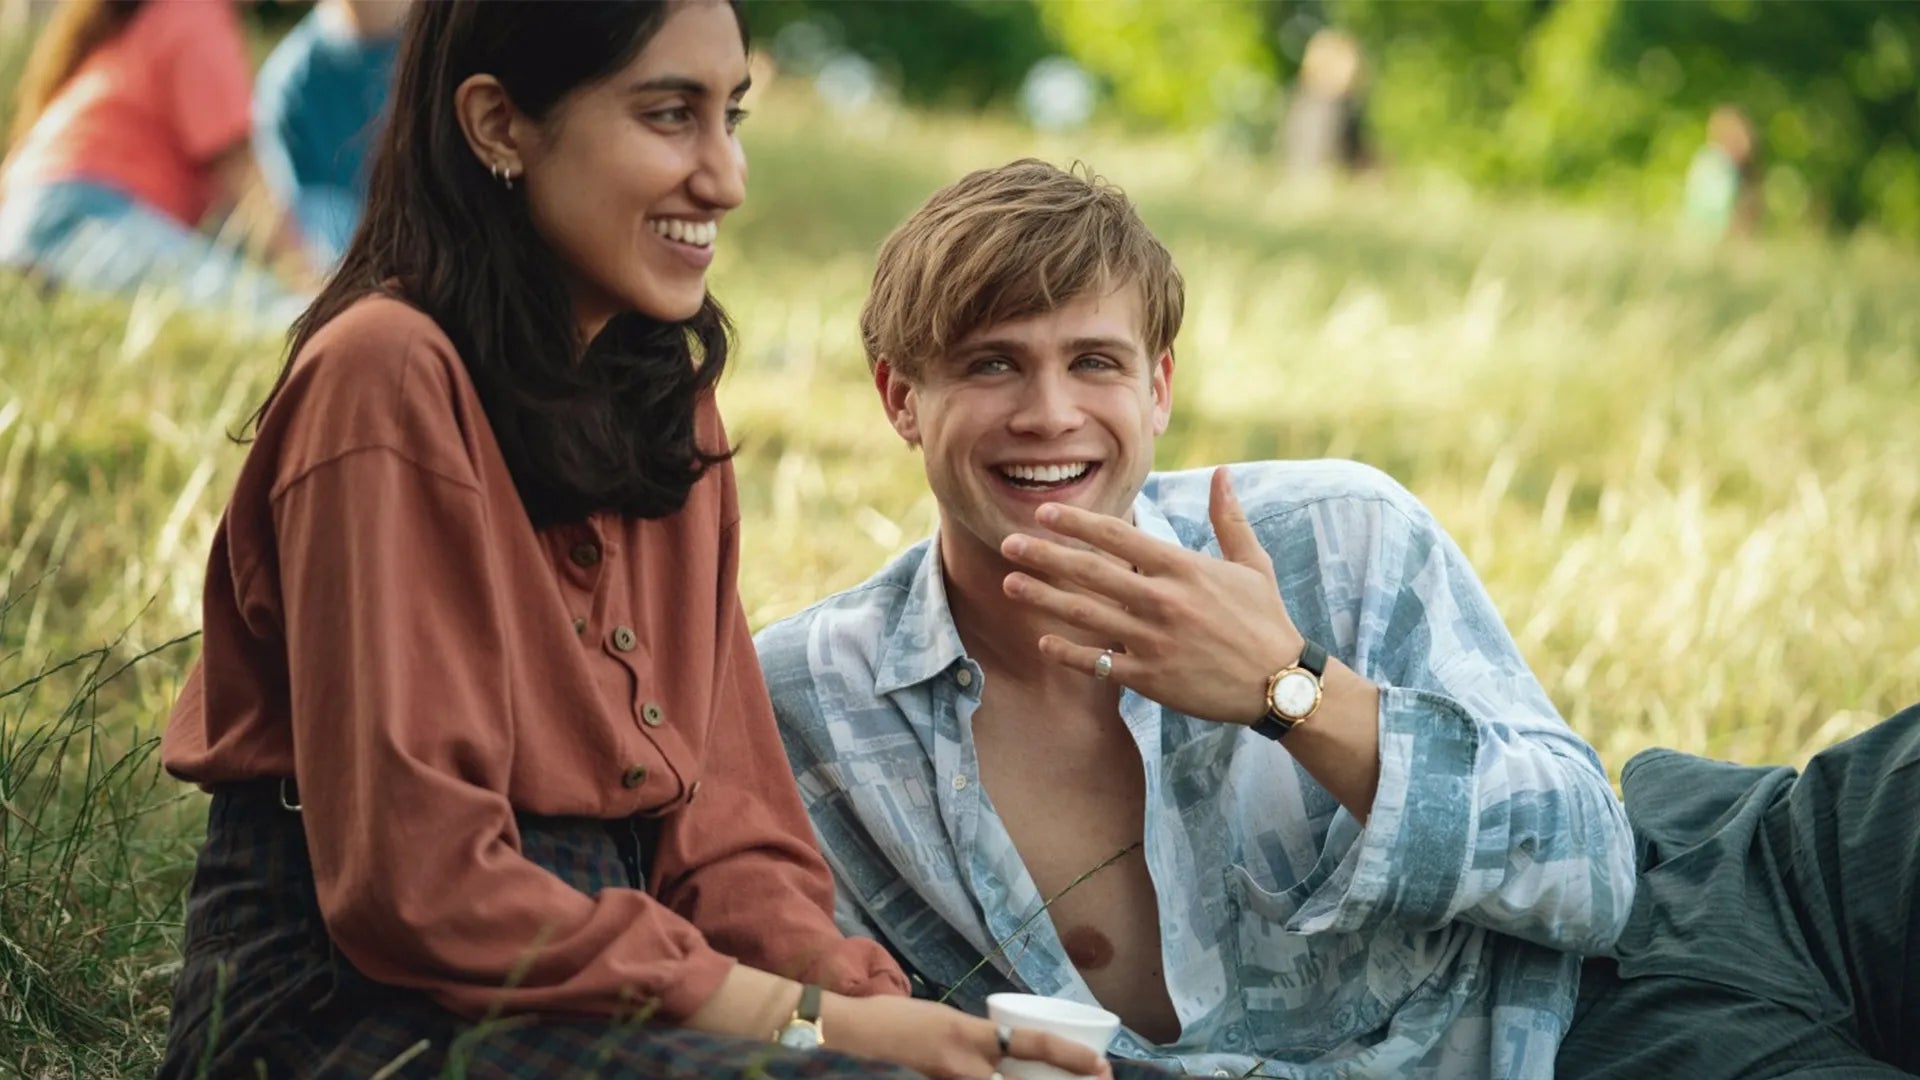 From Netflix's One Day to Everyday: Signet Rings Are Here to Stay